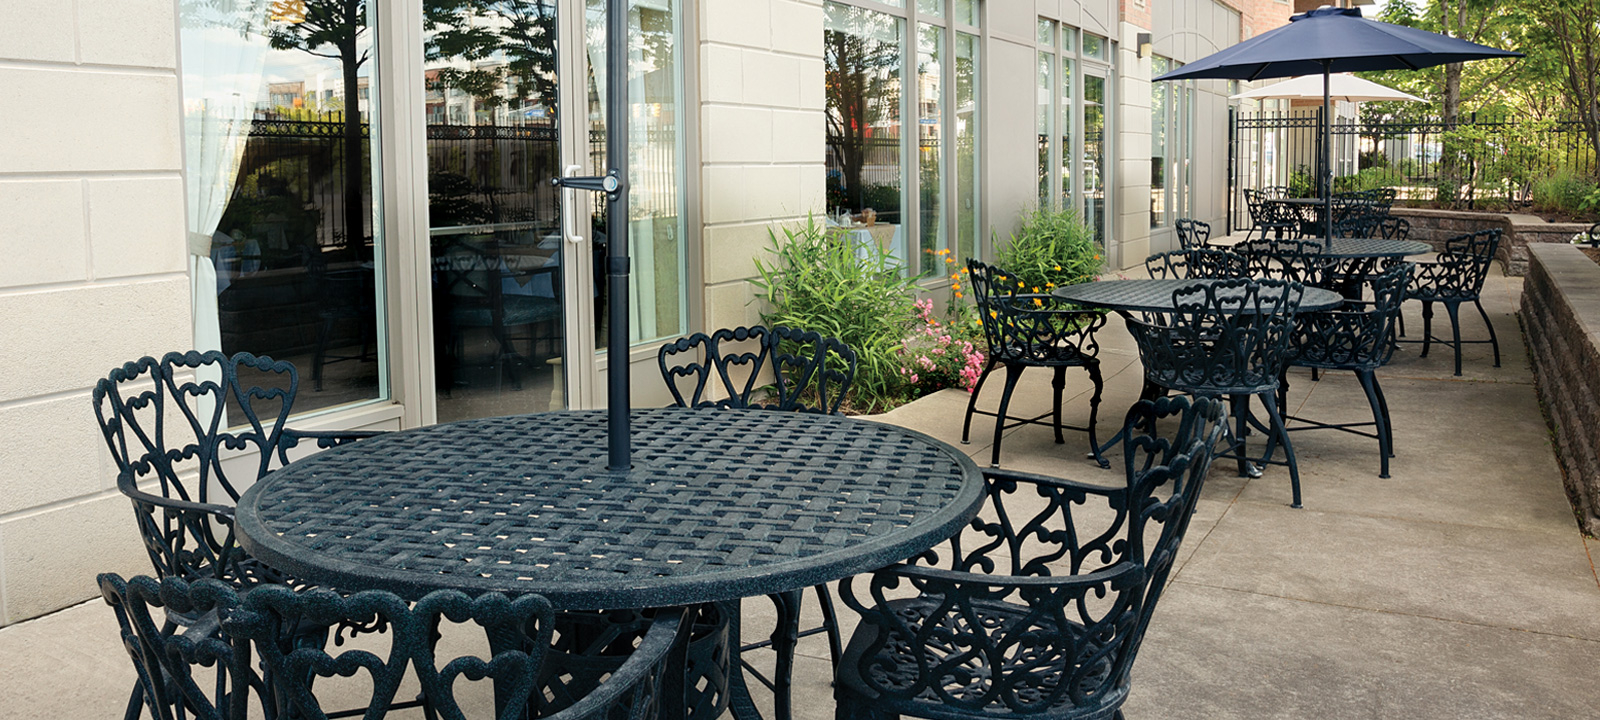 A patio at Erin Mills includes tables and umbrellas for enjoying the outdoors.